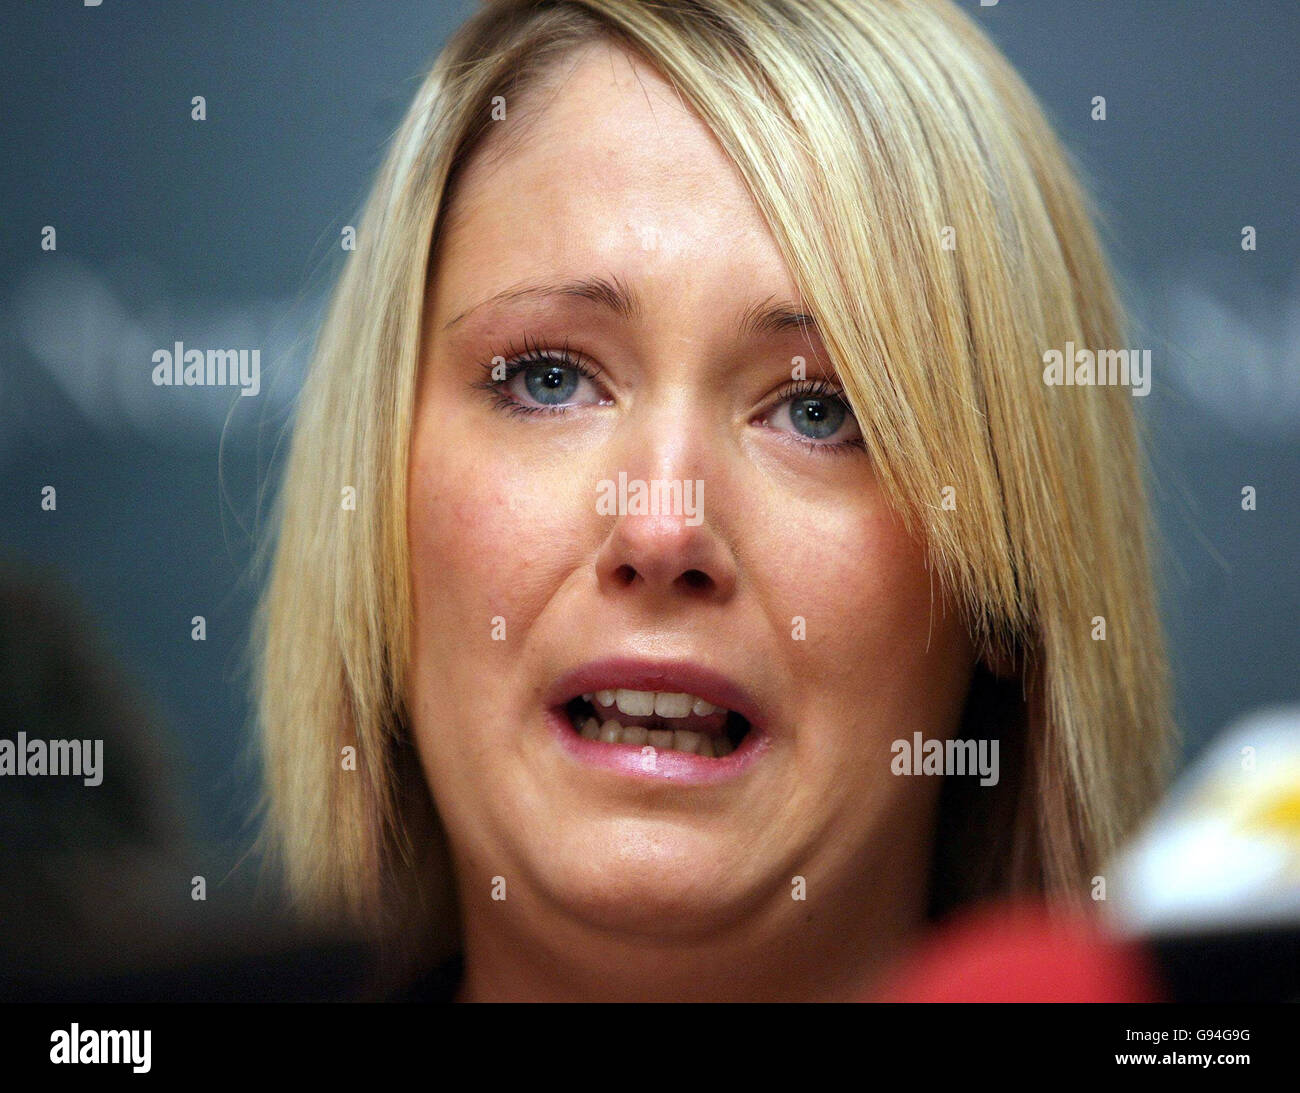 Joanne Dorrian sister of muder victim Lisa Dorrian speaking to the media during a press in Bangor, Wednesday 22nd February 2006. After police investigating the murder of missing Co Down woman Lisa Dorrian said today they believed her body may have been dumped at sea up to six months after she disappeared. Lisa, 25, has not been seen since February 28 last year when she left a party on a seaside caravan park a few miles down the coast from her Bangor home. See PA Story ULSTER Lisa. PRESS ASSOCIATION Photo. Photo credit should read: Paul Faith/PA. Stock Photo